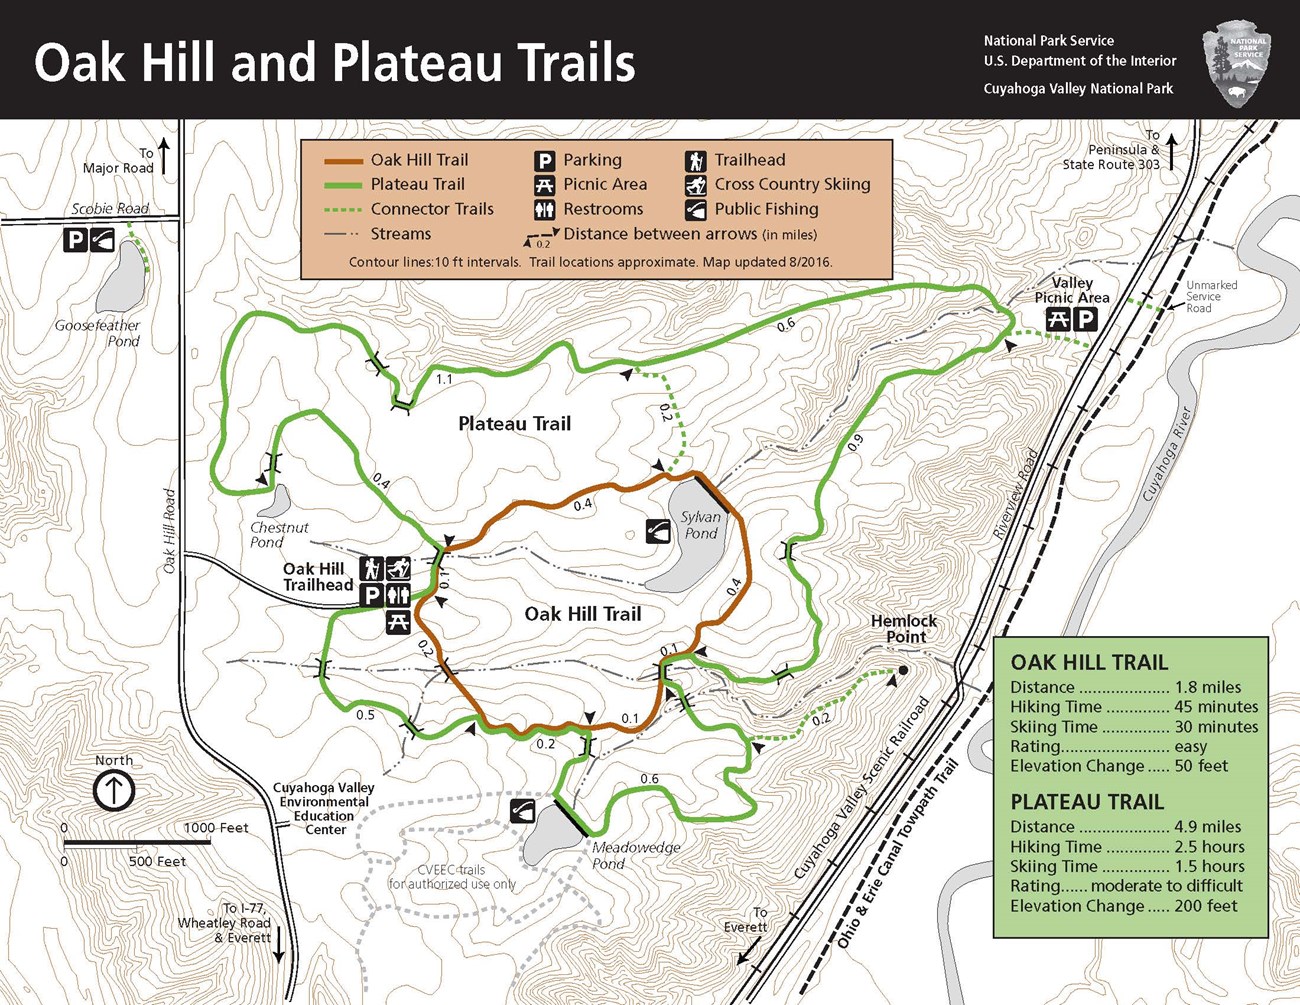 Oak Hill Trail, 1.8-mile loop, easy rating, 50 feet elevation change. Plateau Trail, 4.9 miles, moderate to difficult rating, 200 feet elevation change, steep in areas. Access the trailhead off Oak Hill Road.